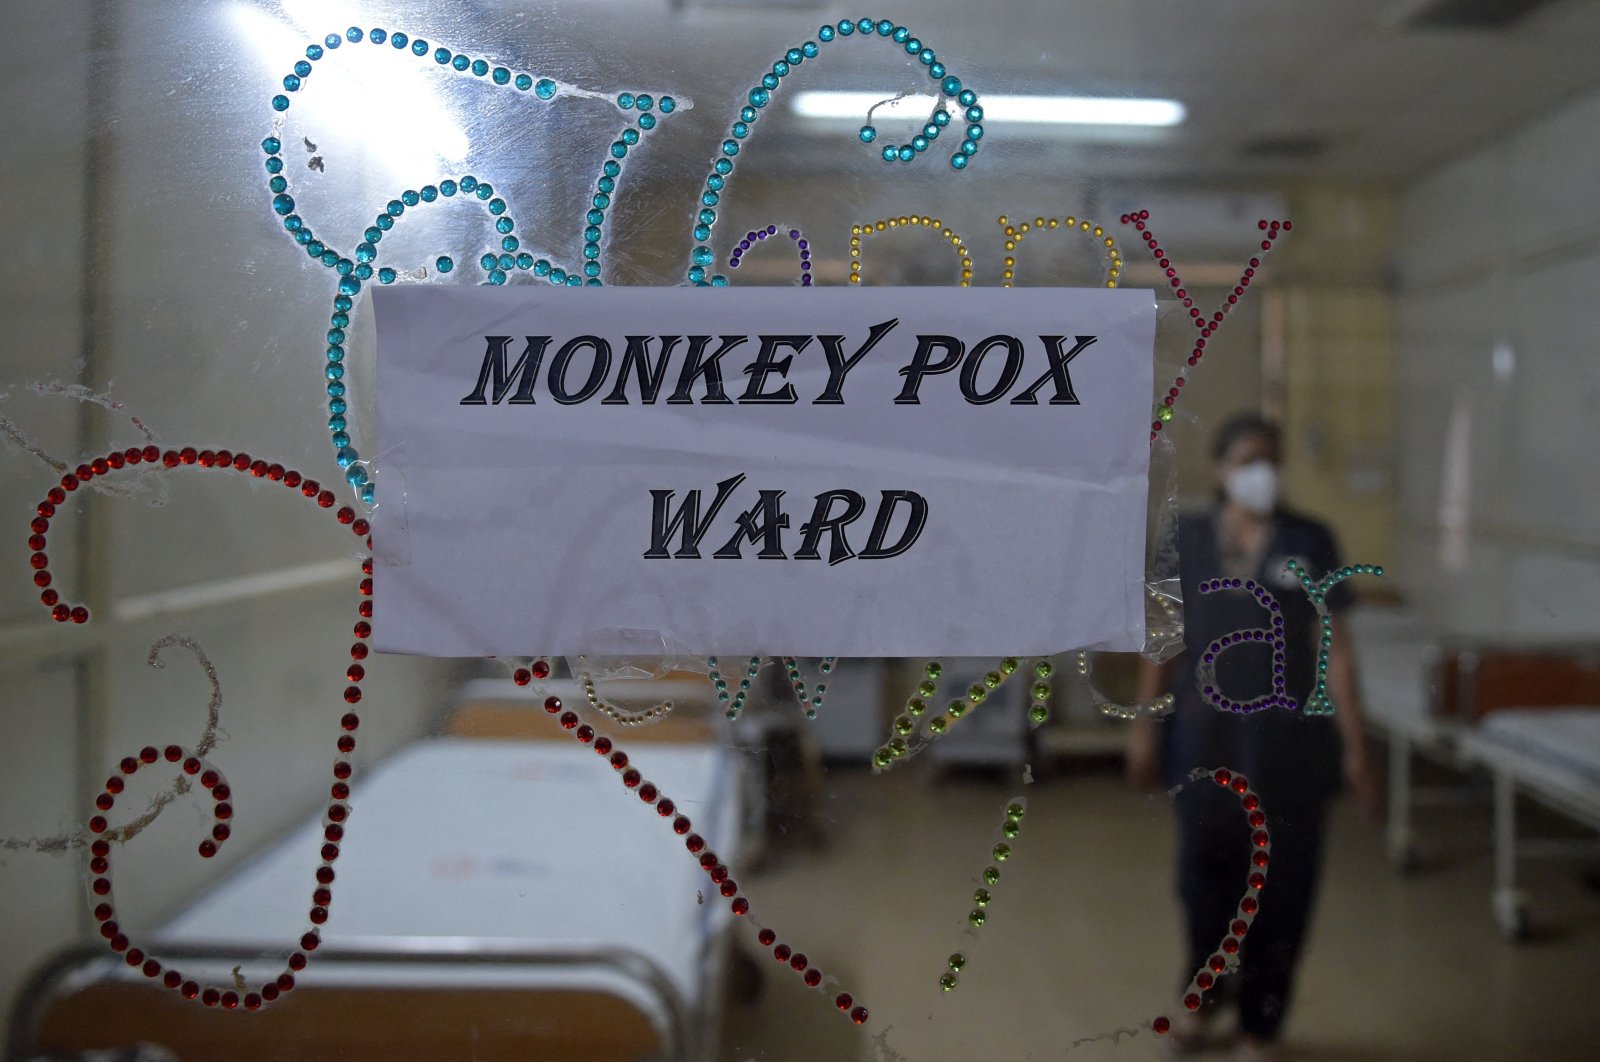 A health worker walks inside an isolation ward built as a precautionary measure for the monkeypox patients at a civil hospital in Ahmedabad, India, July 25, 2022. (AFP Photo)